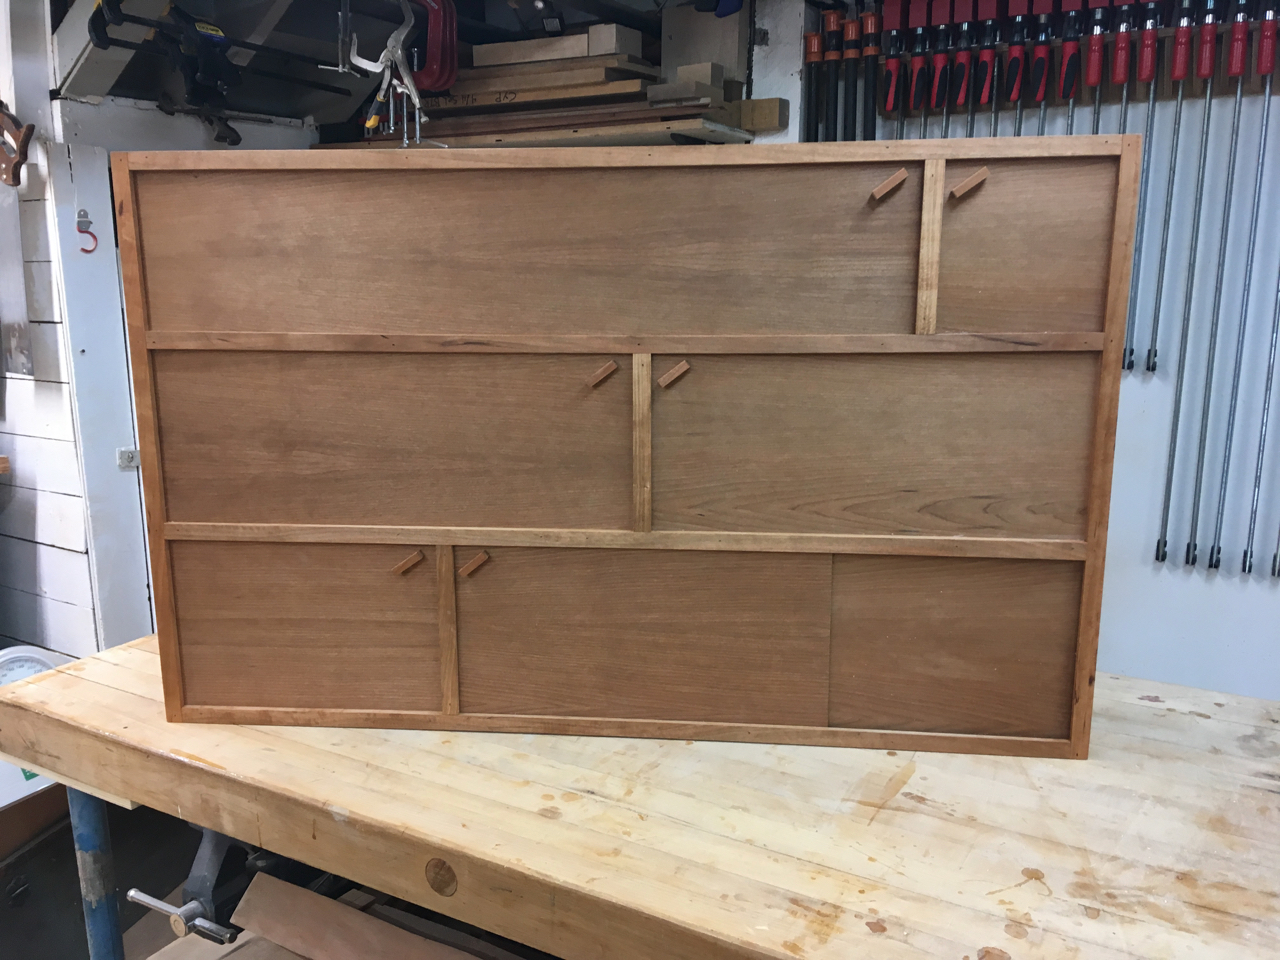 Completed Cabinet